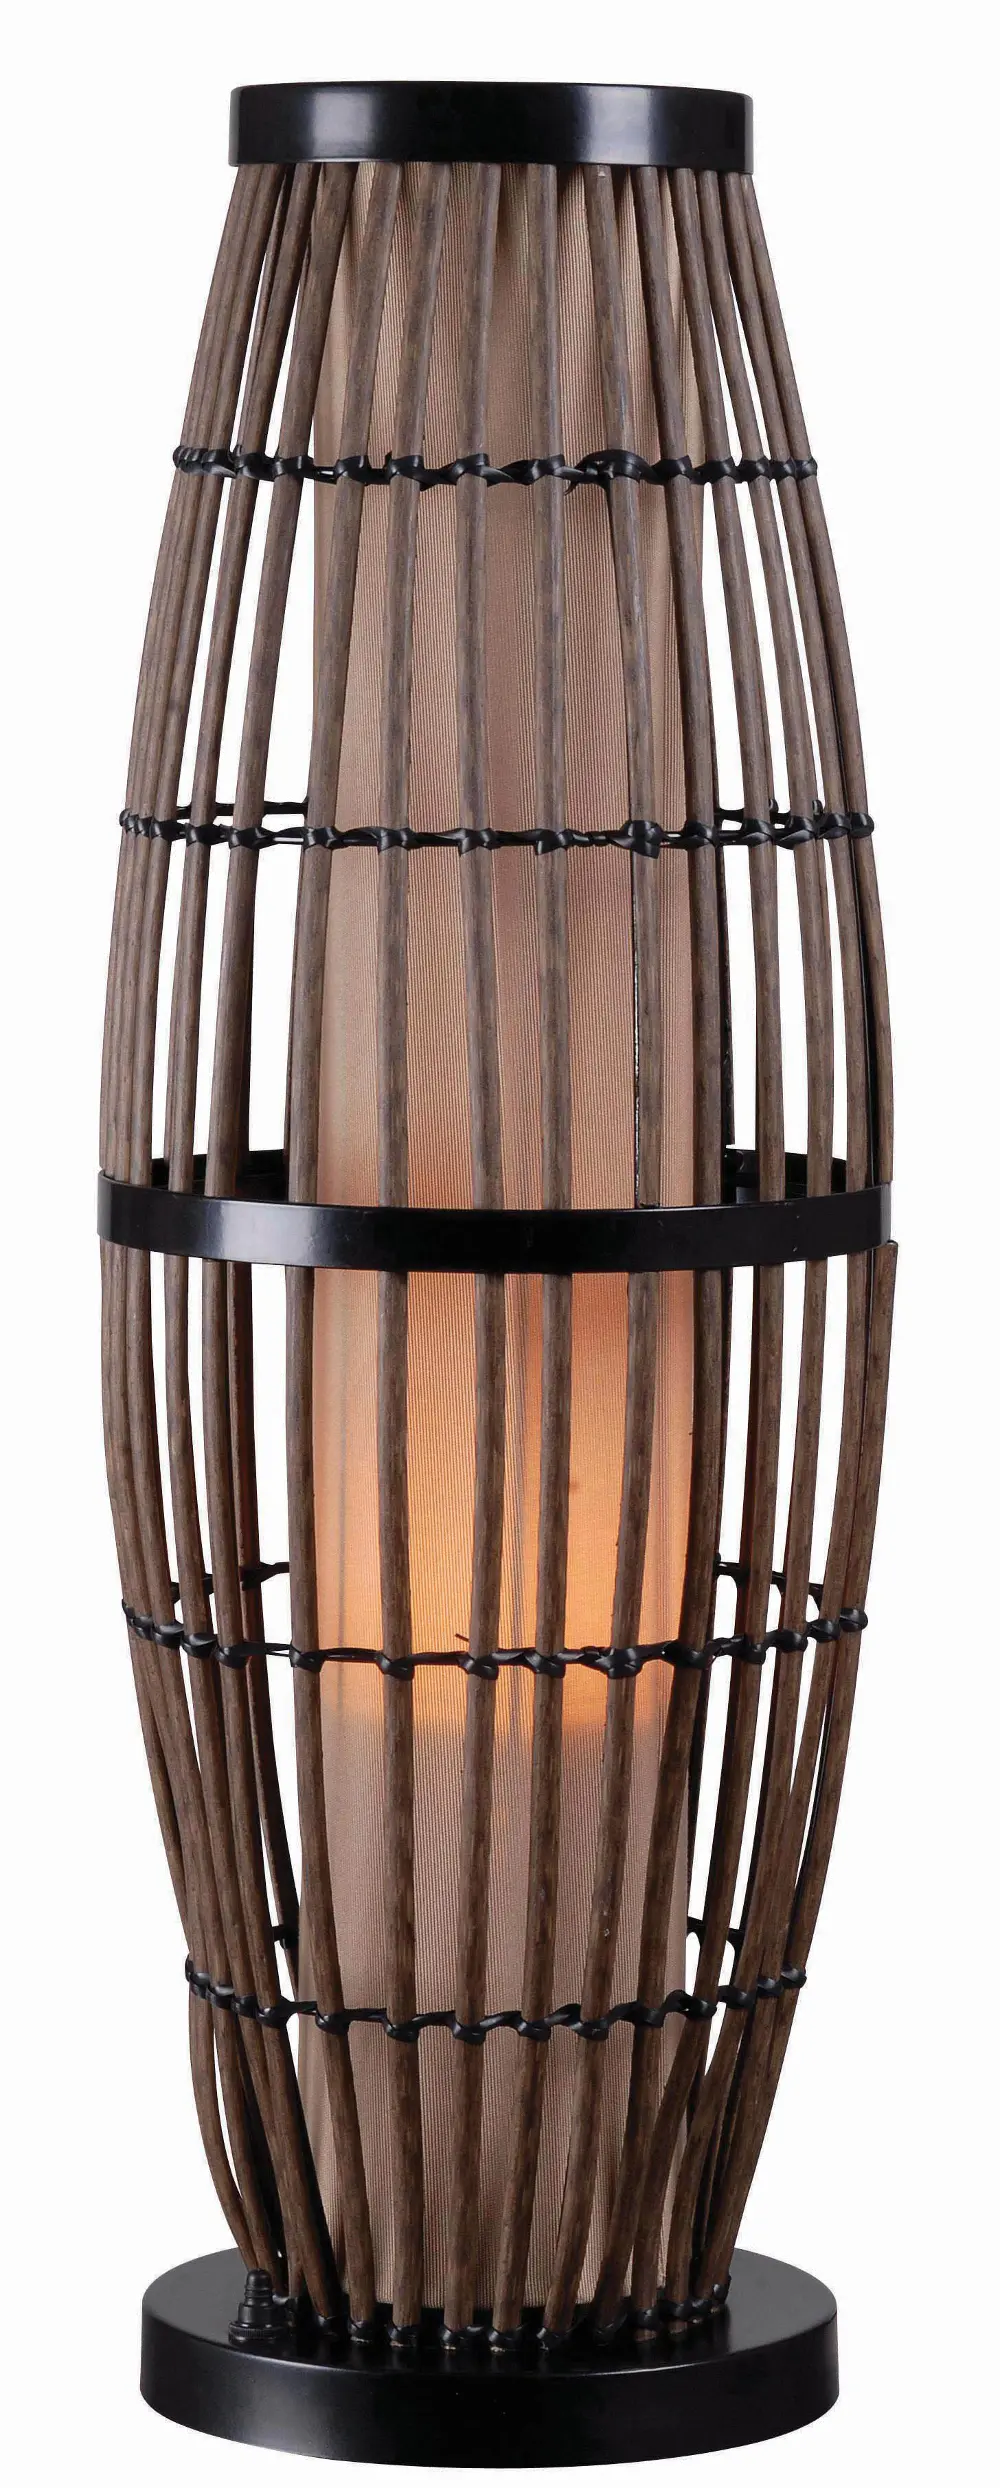 Rattan Outdoor Table Lamp with Bronze Accents - Biscayne-1